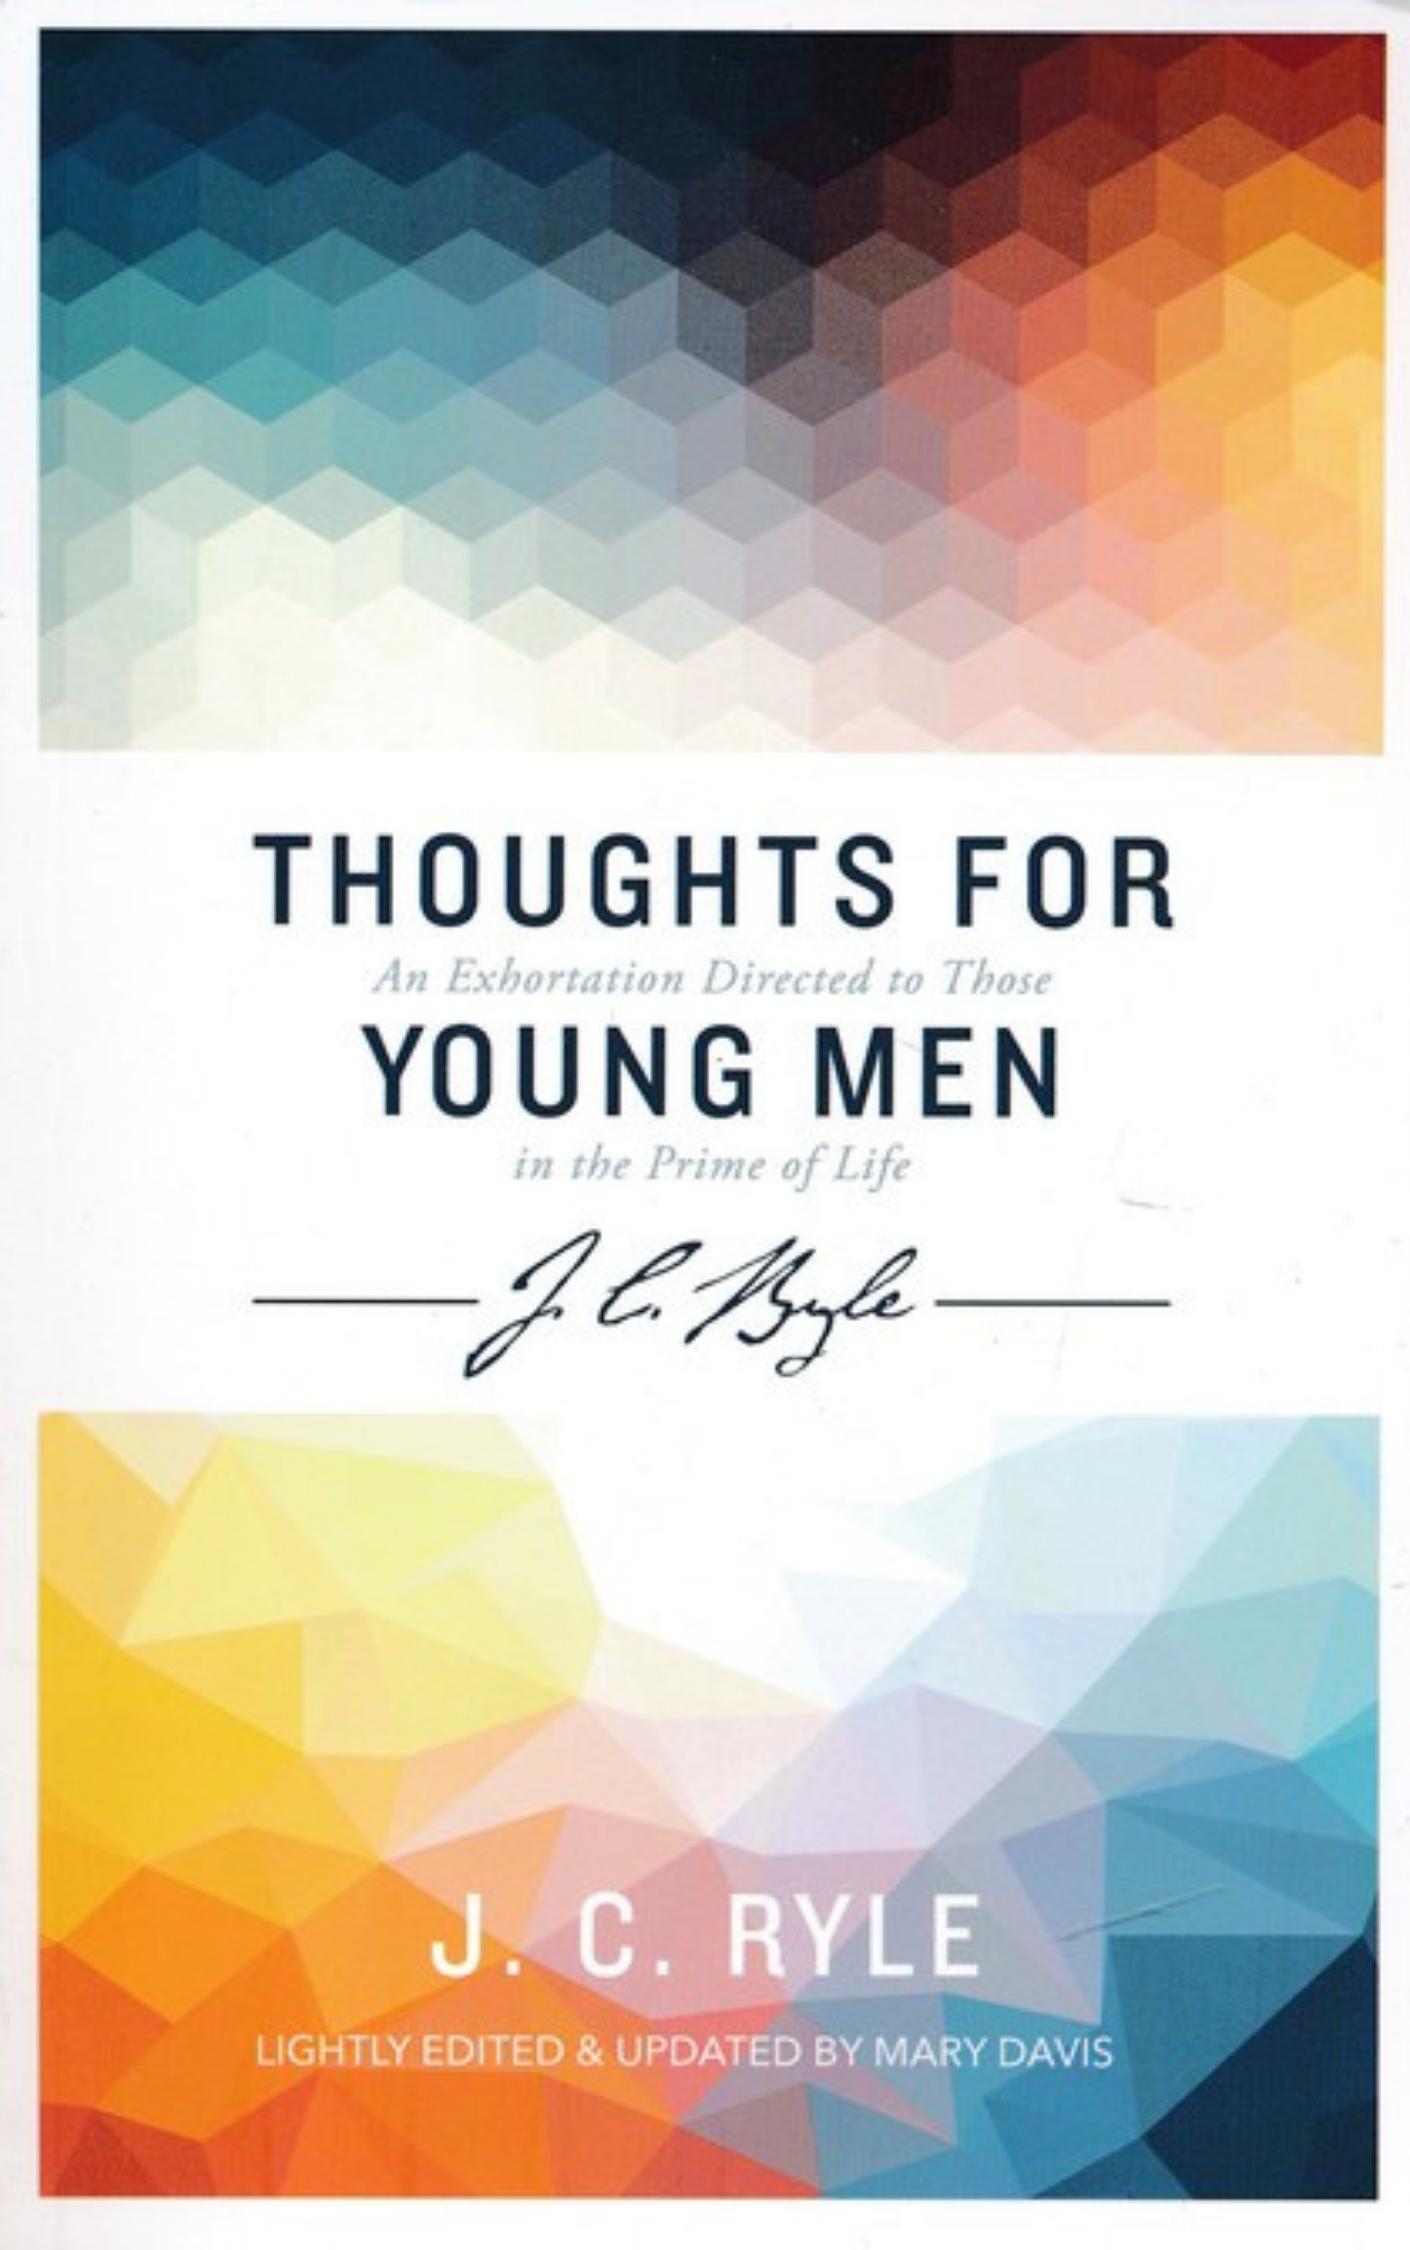 THOUGHTS FOR YOUNG MEN